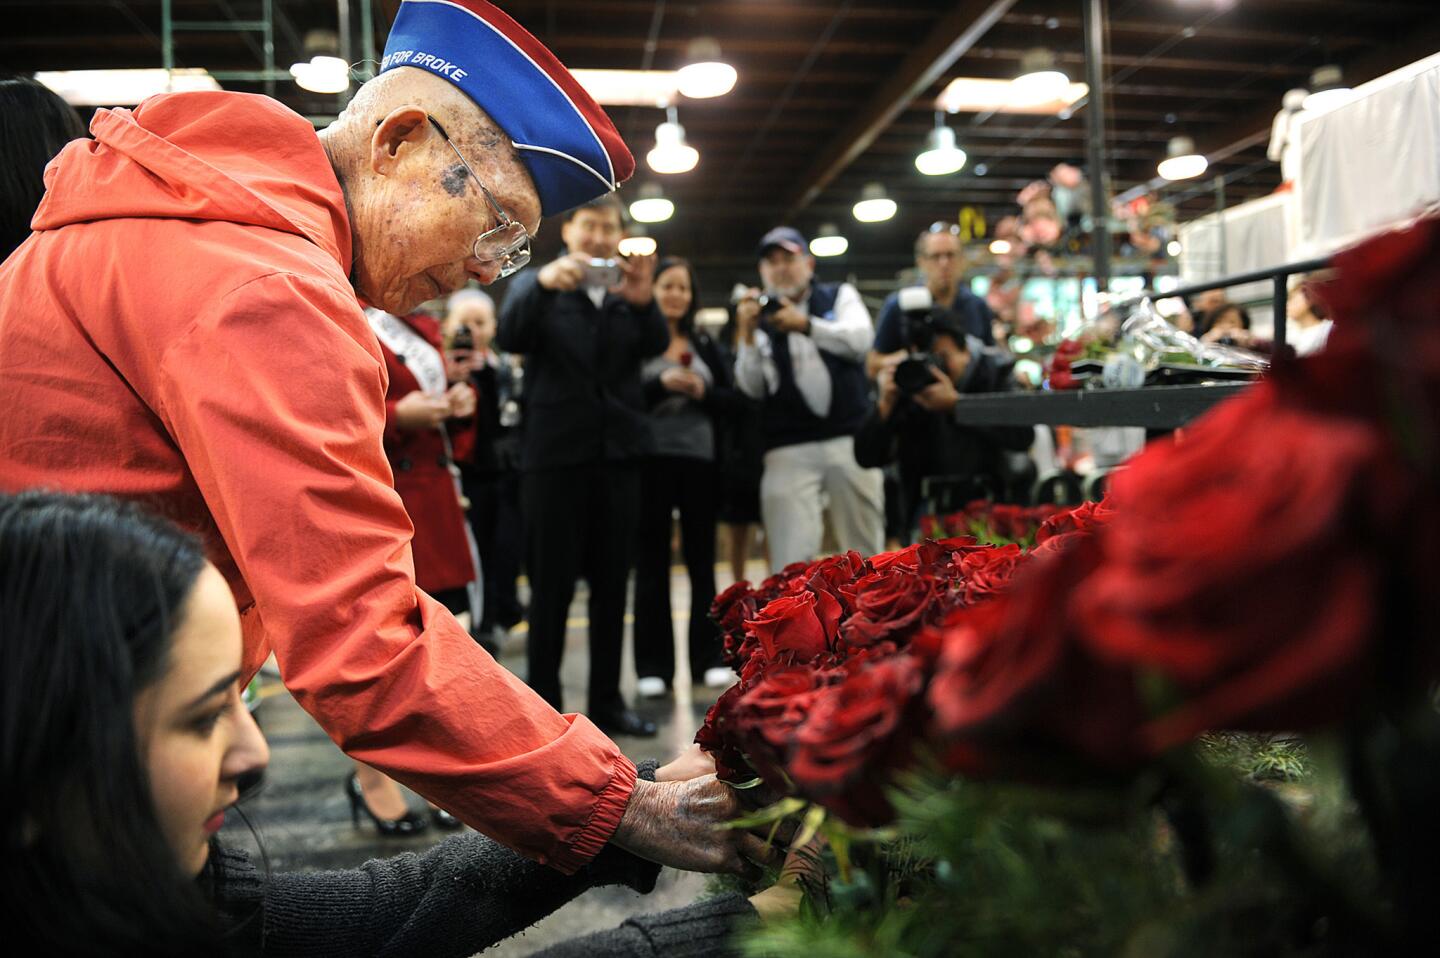 World War II veteran Dr. Robert Baba, 97, left, with help from his granddaughter, Amanda Newman, places a rose on the "Go for Broke" Rose Parade float, sponsored by the city of Alhambra. Five Japanese American soldiers who fought in World War II have been chosen to ride on the float.